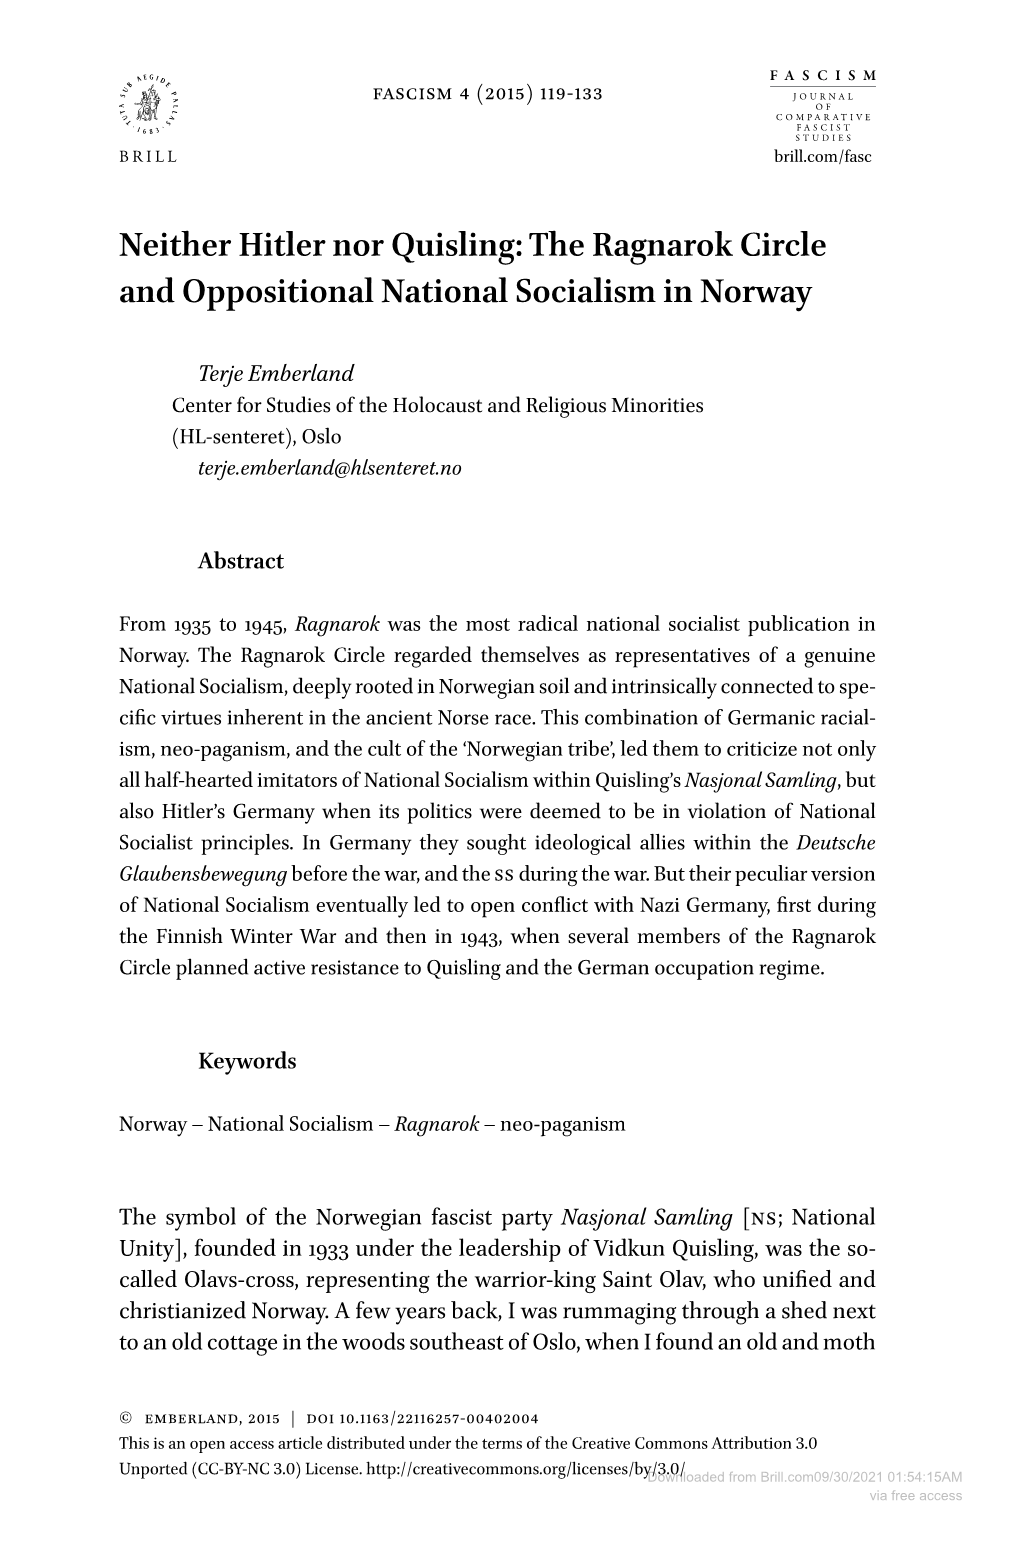 Neither Hitler Nor Quisling: the Ragnarok Circle and Oppositional National Socialism in Norway